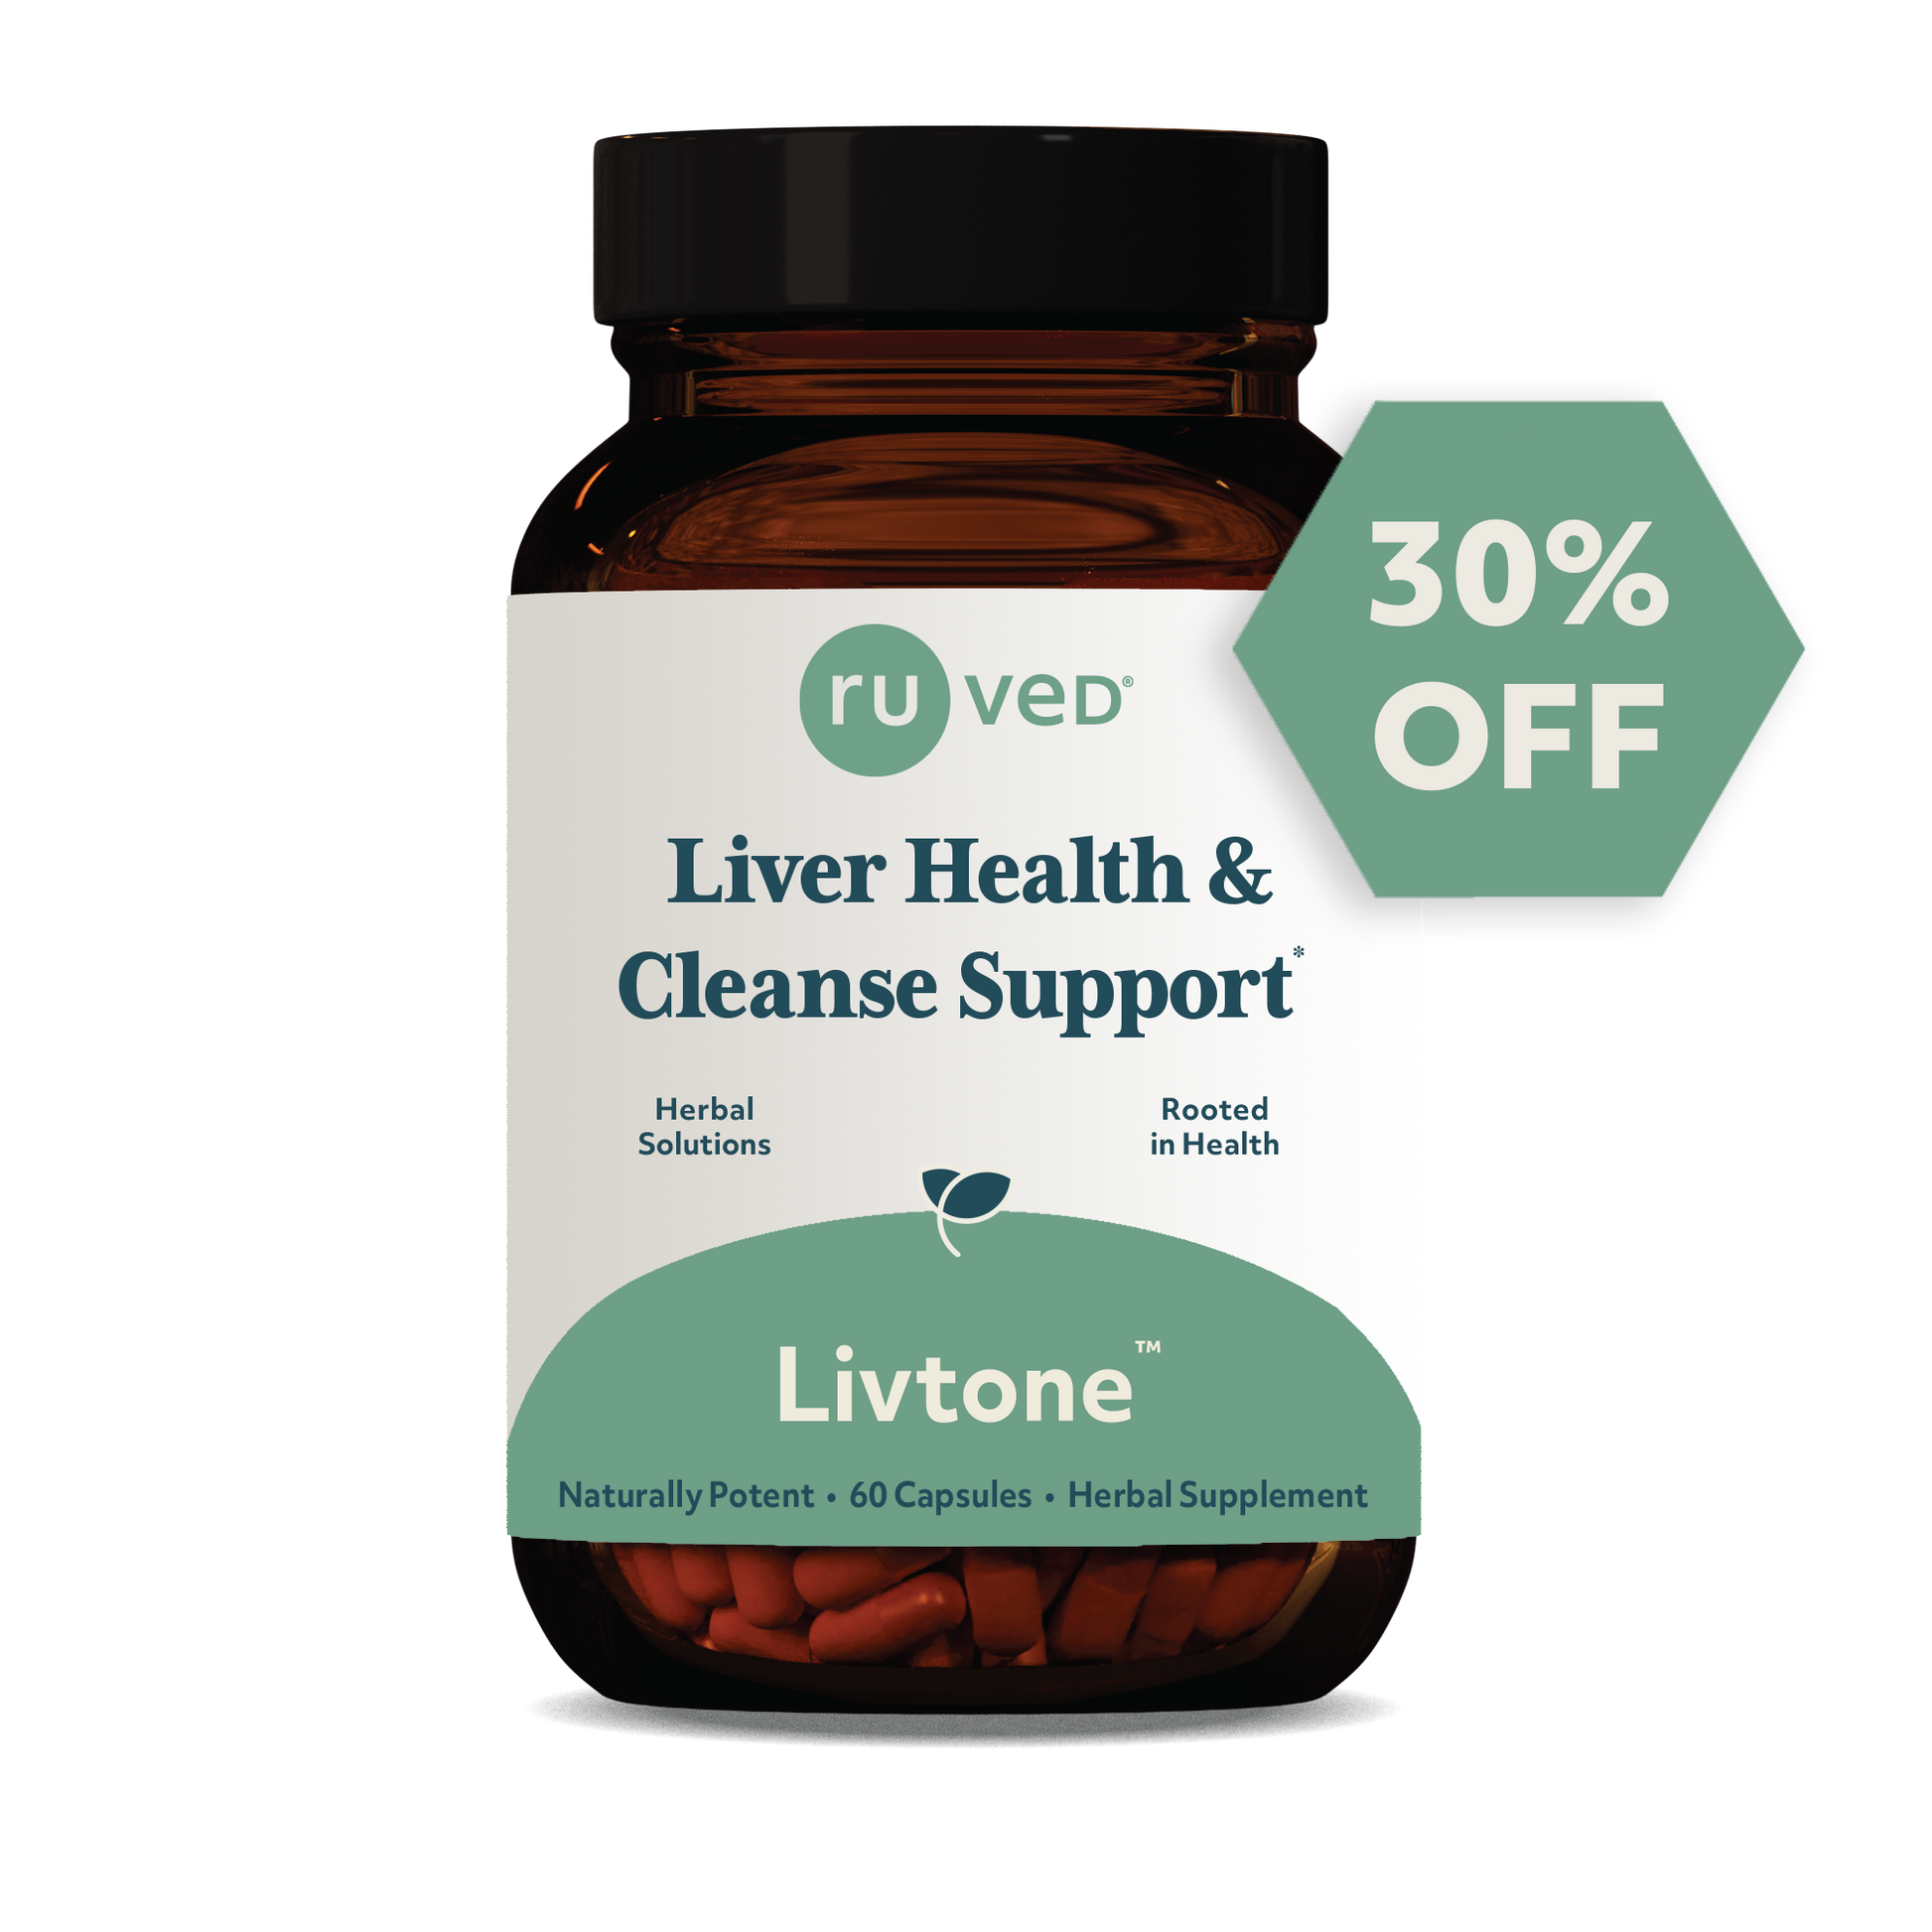 livtone Holistic Blend for Liver Vitality, Promotes Detoxification and Defense Against Indulgences by ruved herbal supplements and ayush herbs